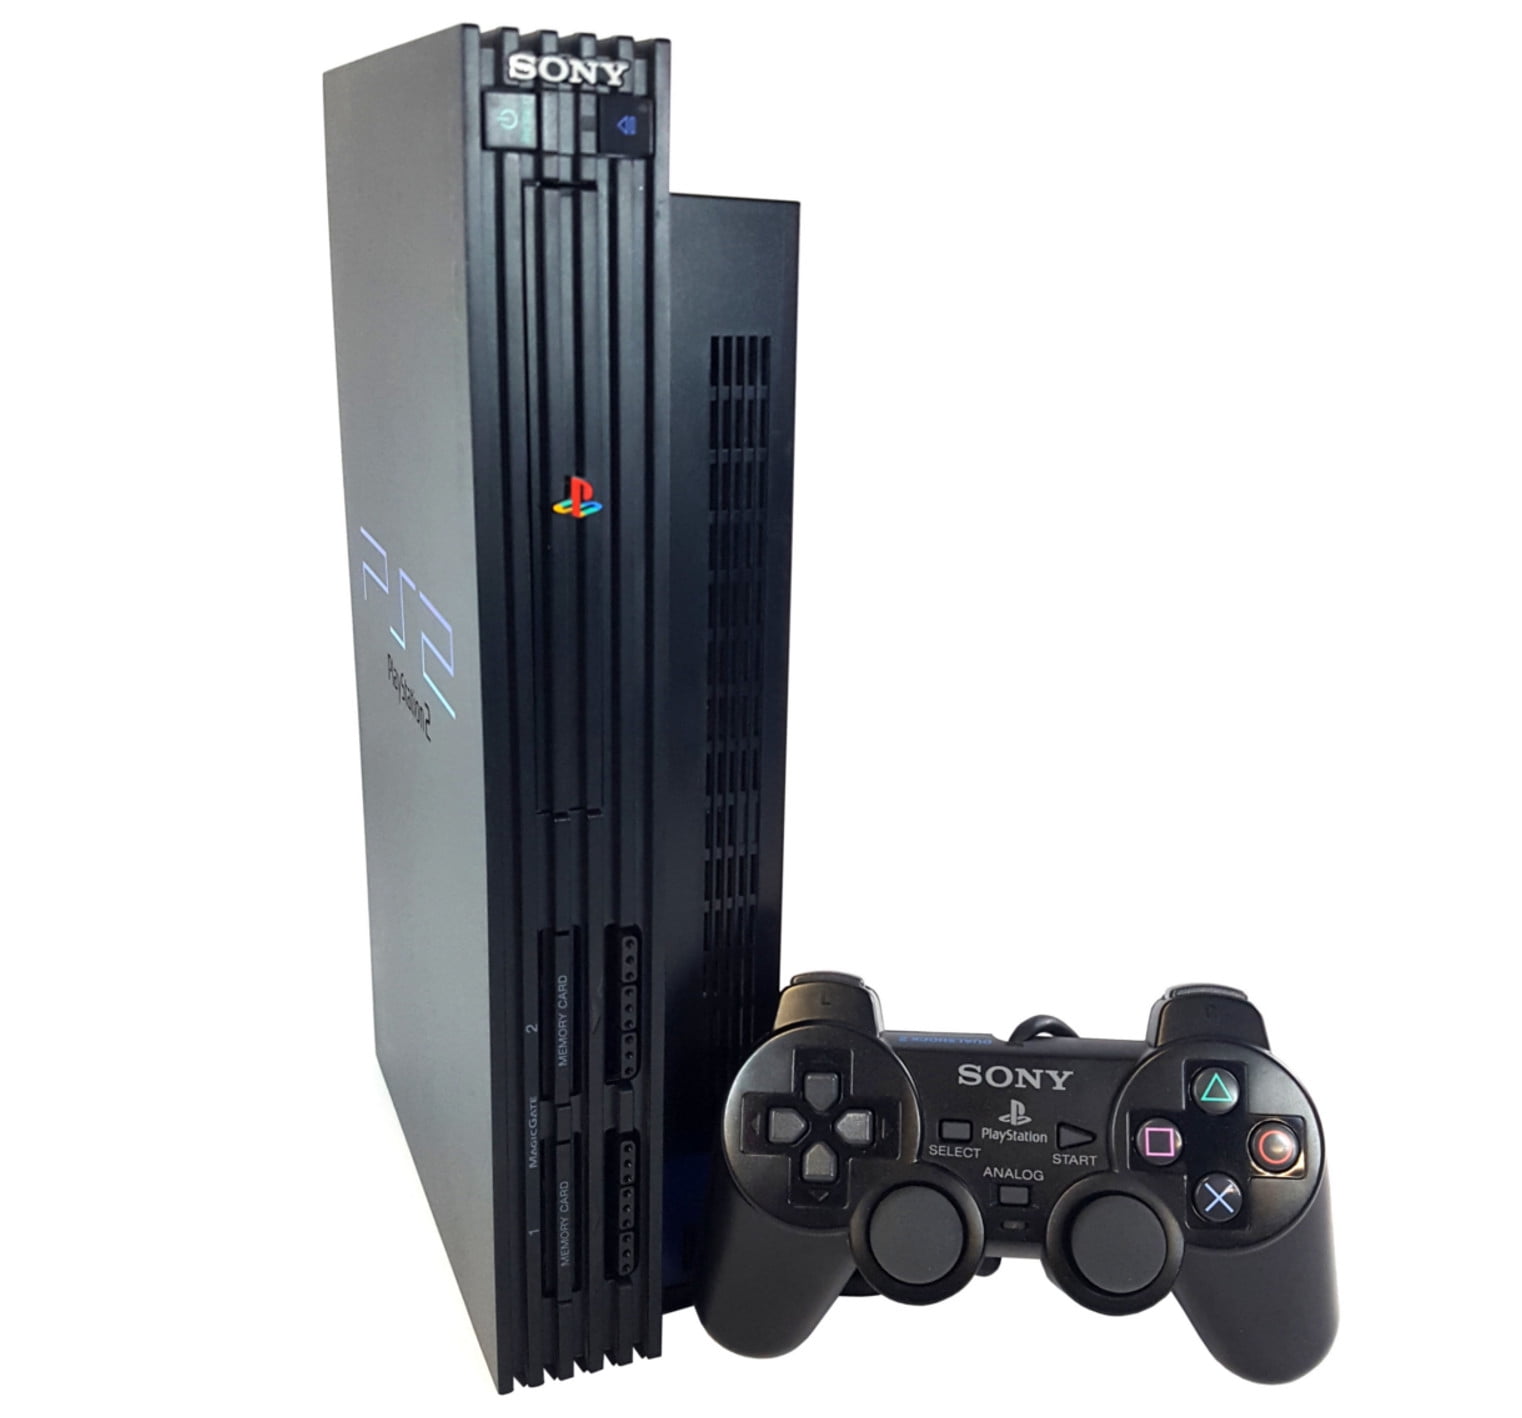 ps2 console with 2 controllers